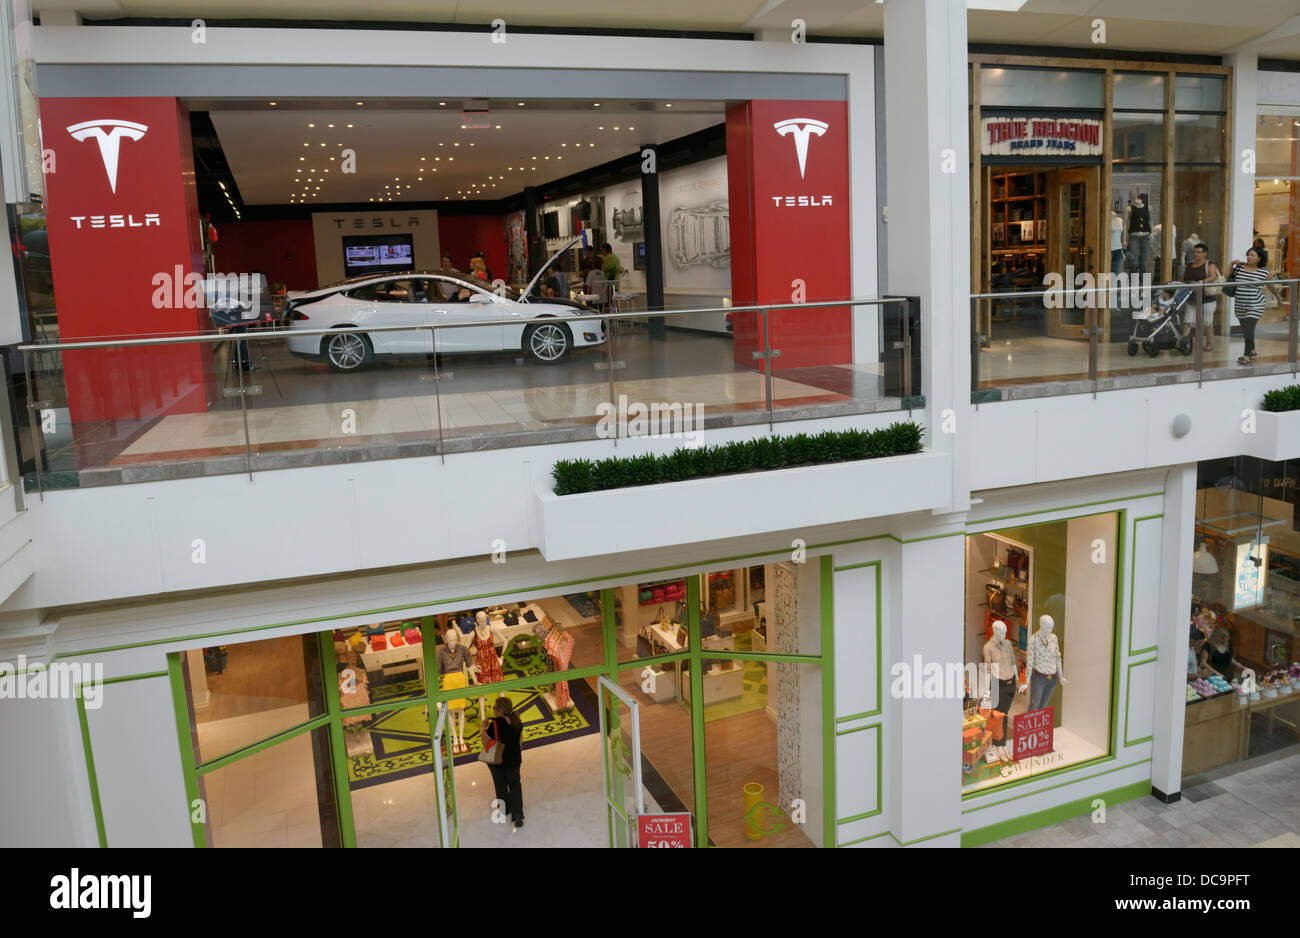 Tesla Electric Car Dealer Retail Store In A Shopping Mall Nj